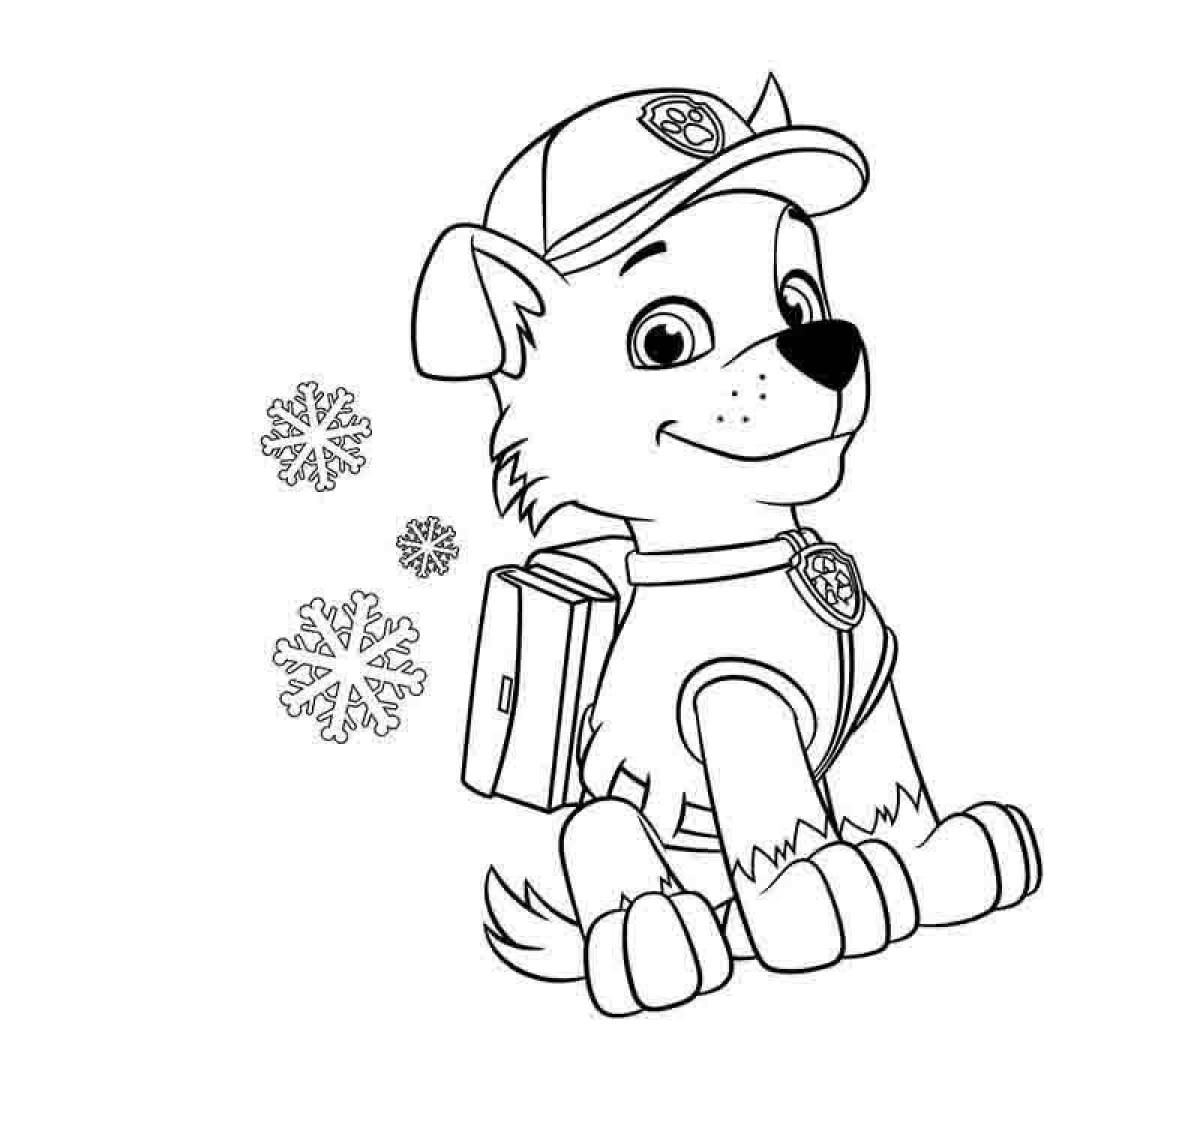 Rocky paw patrol funny coloring book